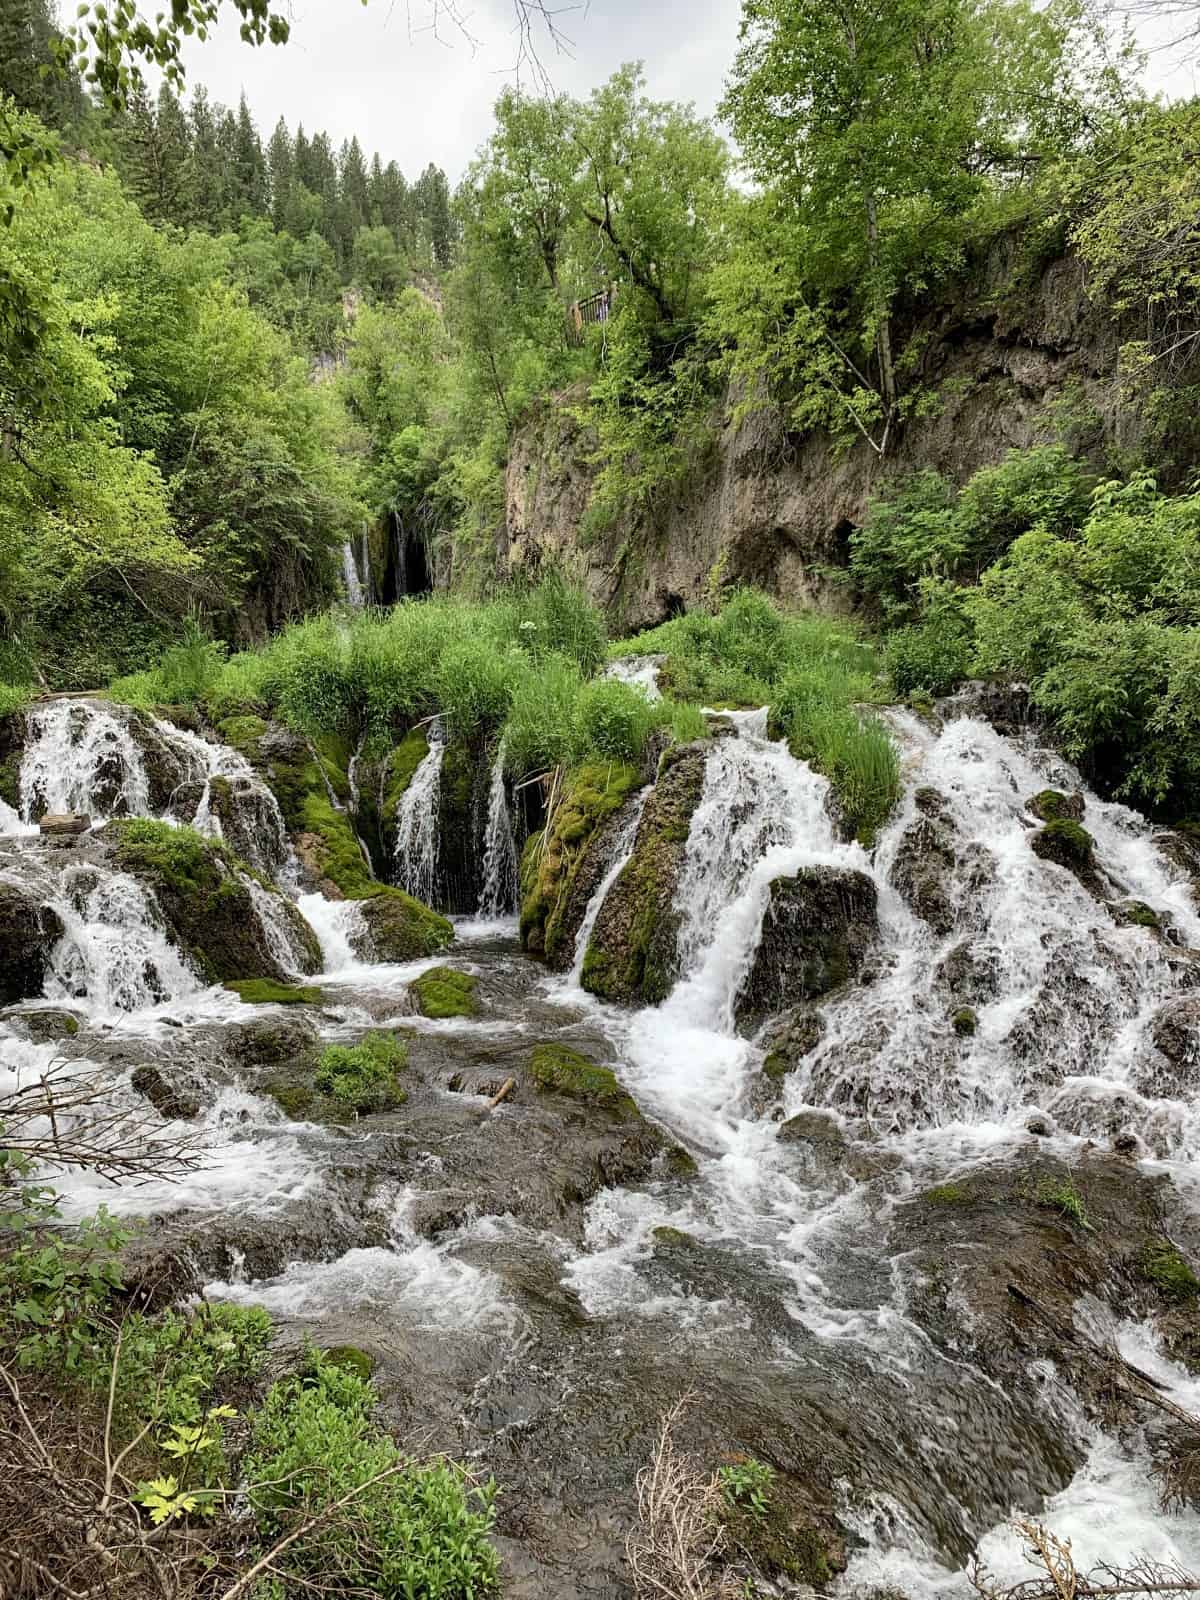 A Day Trip Along Spearfish Canyon Scenic Byway, South Dakota | If you're planning a South Dakota road trip or spending time in the Rapid City area, Spearfish Canyon is a great under-the-radar option for exploring. Easily accessible waterfalls, towering limestone canyon walls, and much more. #southdakota #rapidcity #spearfishcanyon #roadtrip #blackhills